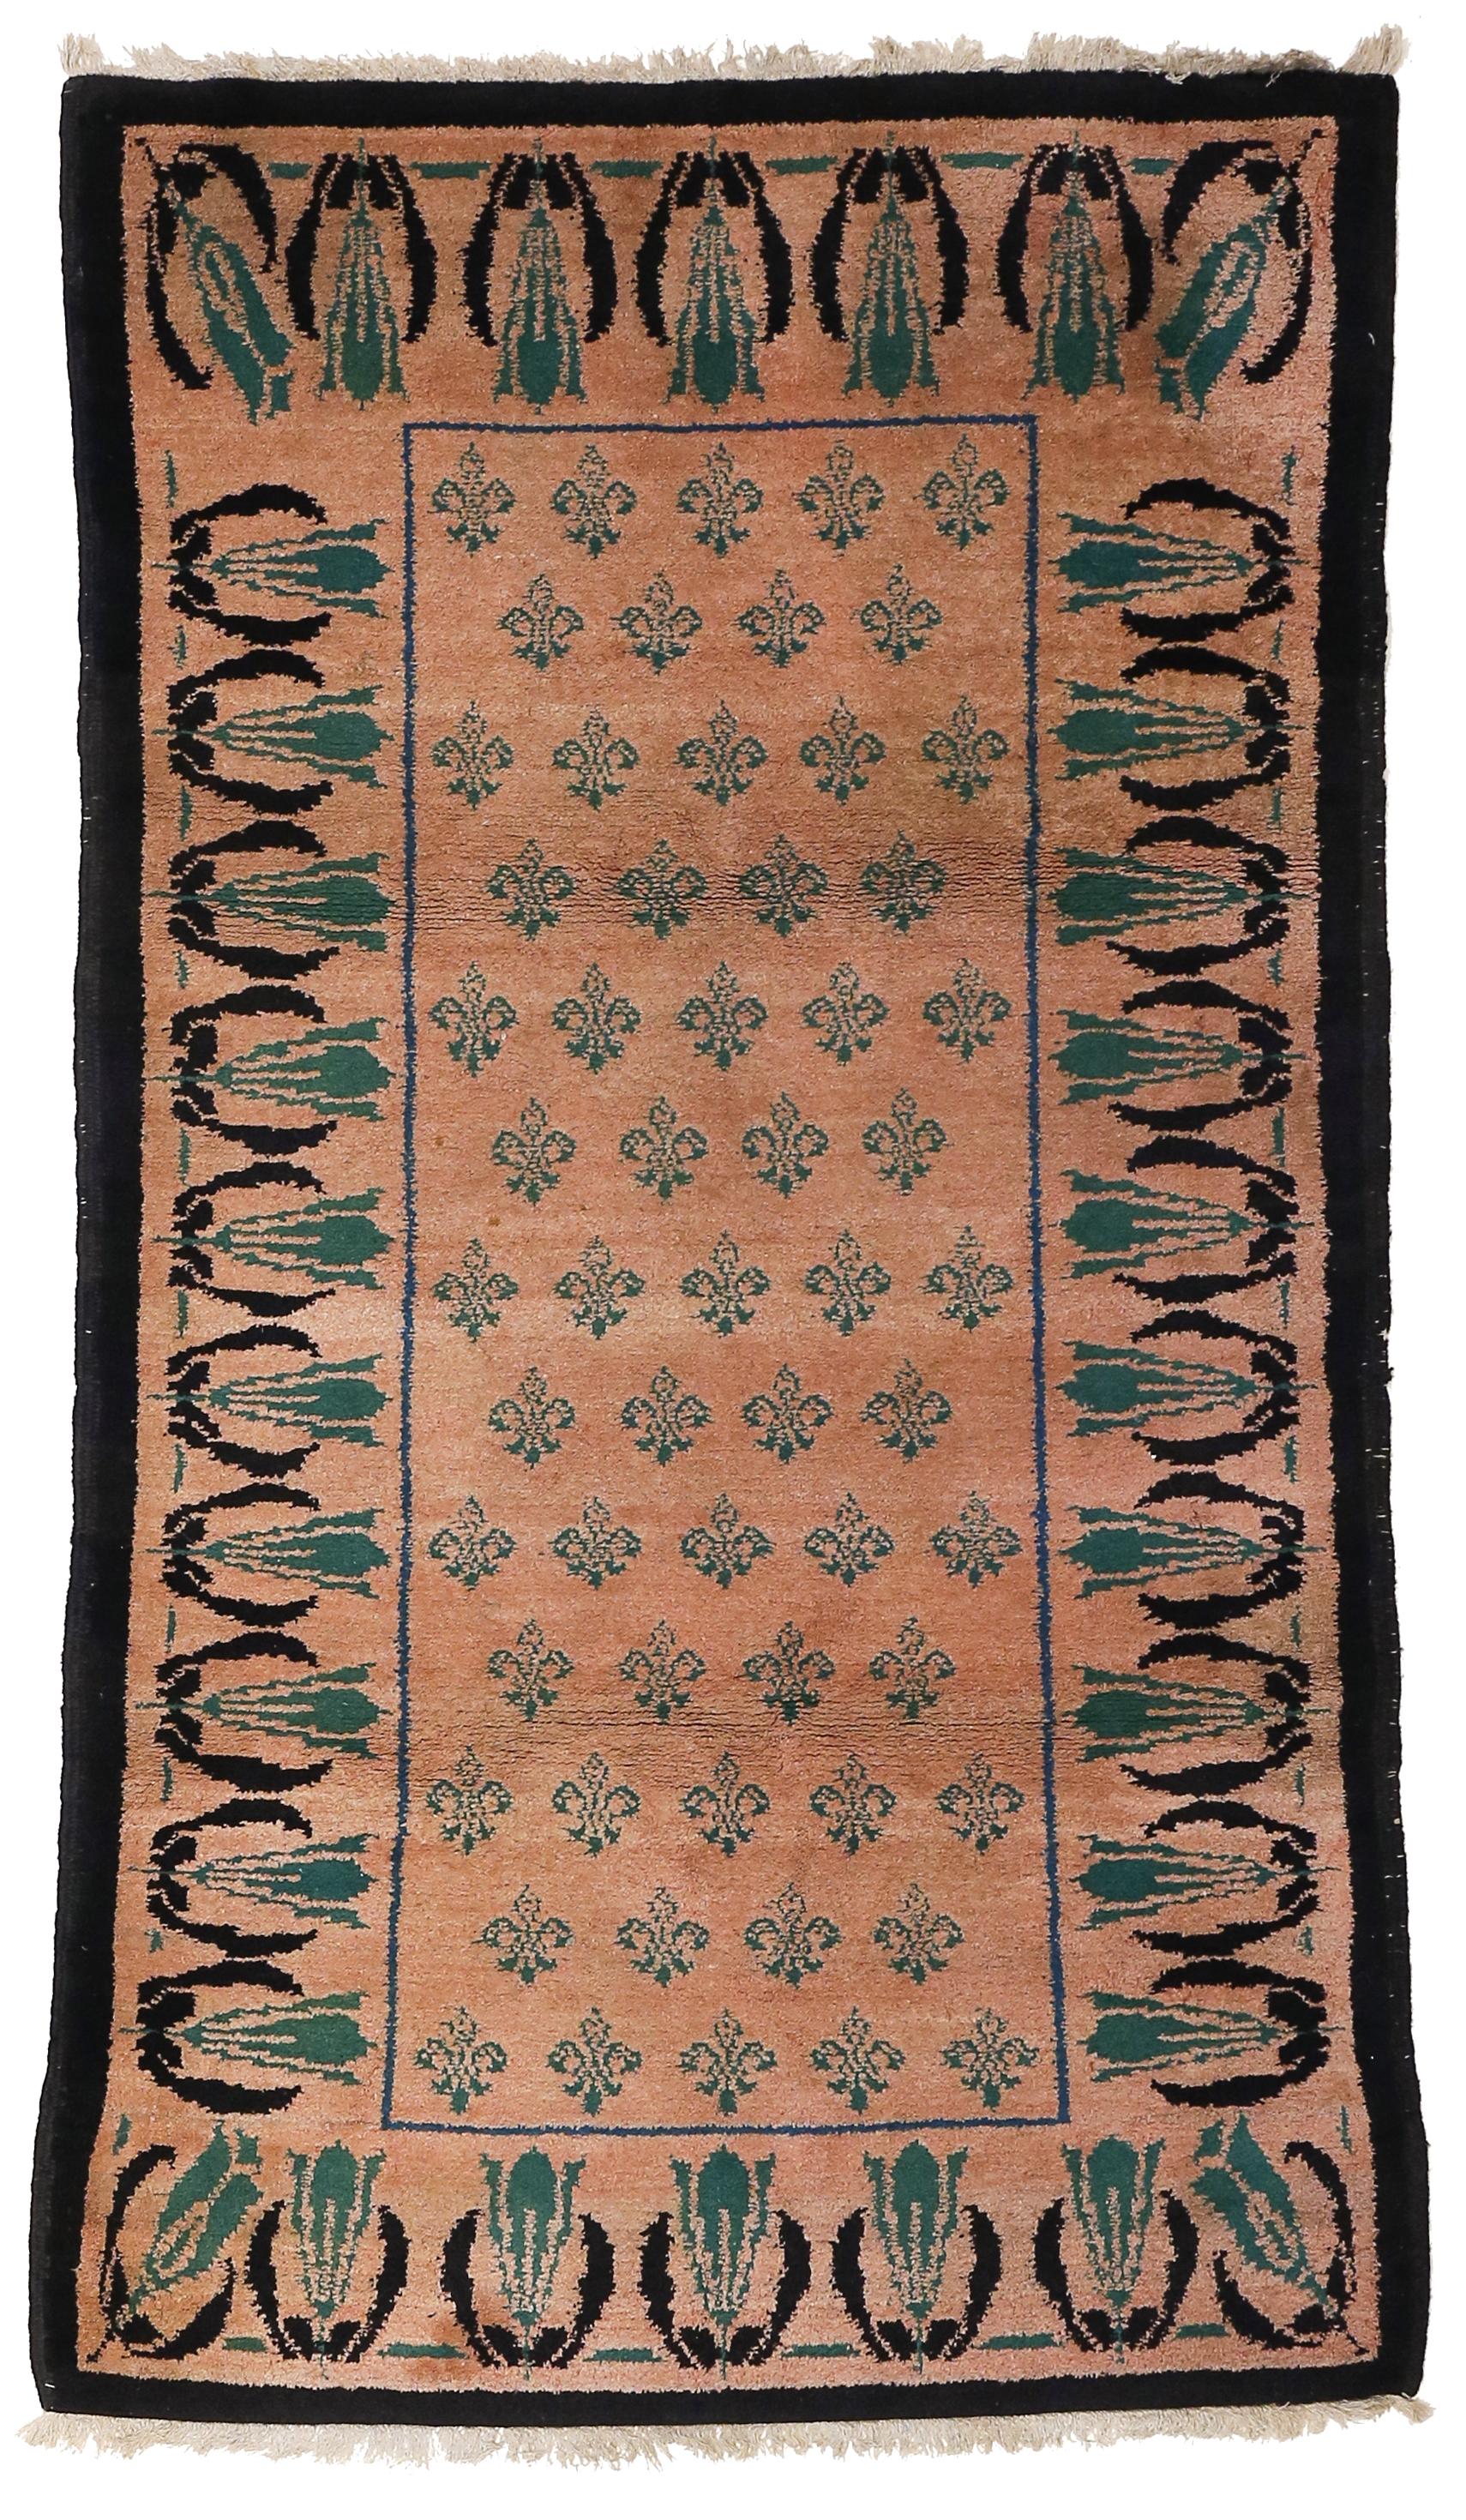 An unusual Arts & Crafts rug, sturdily woven in wool with an all-over pattern of 'fleur-de-lys' and a border of stylized tulips in green on a soft coral background.